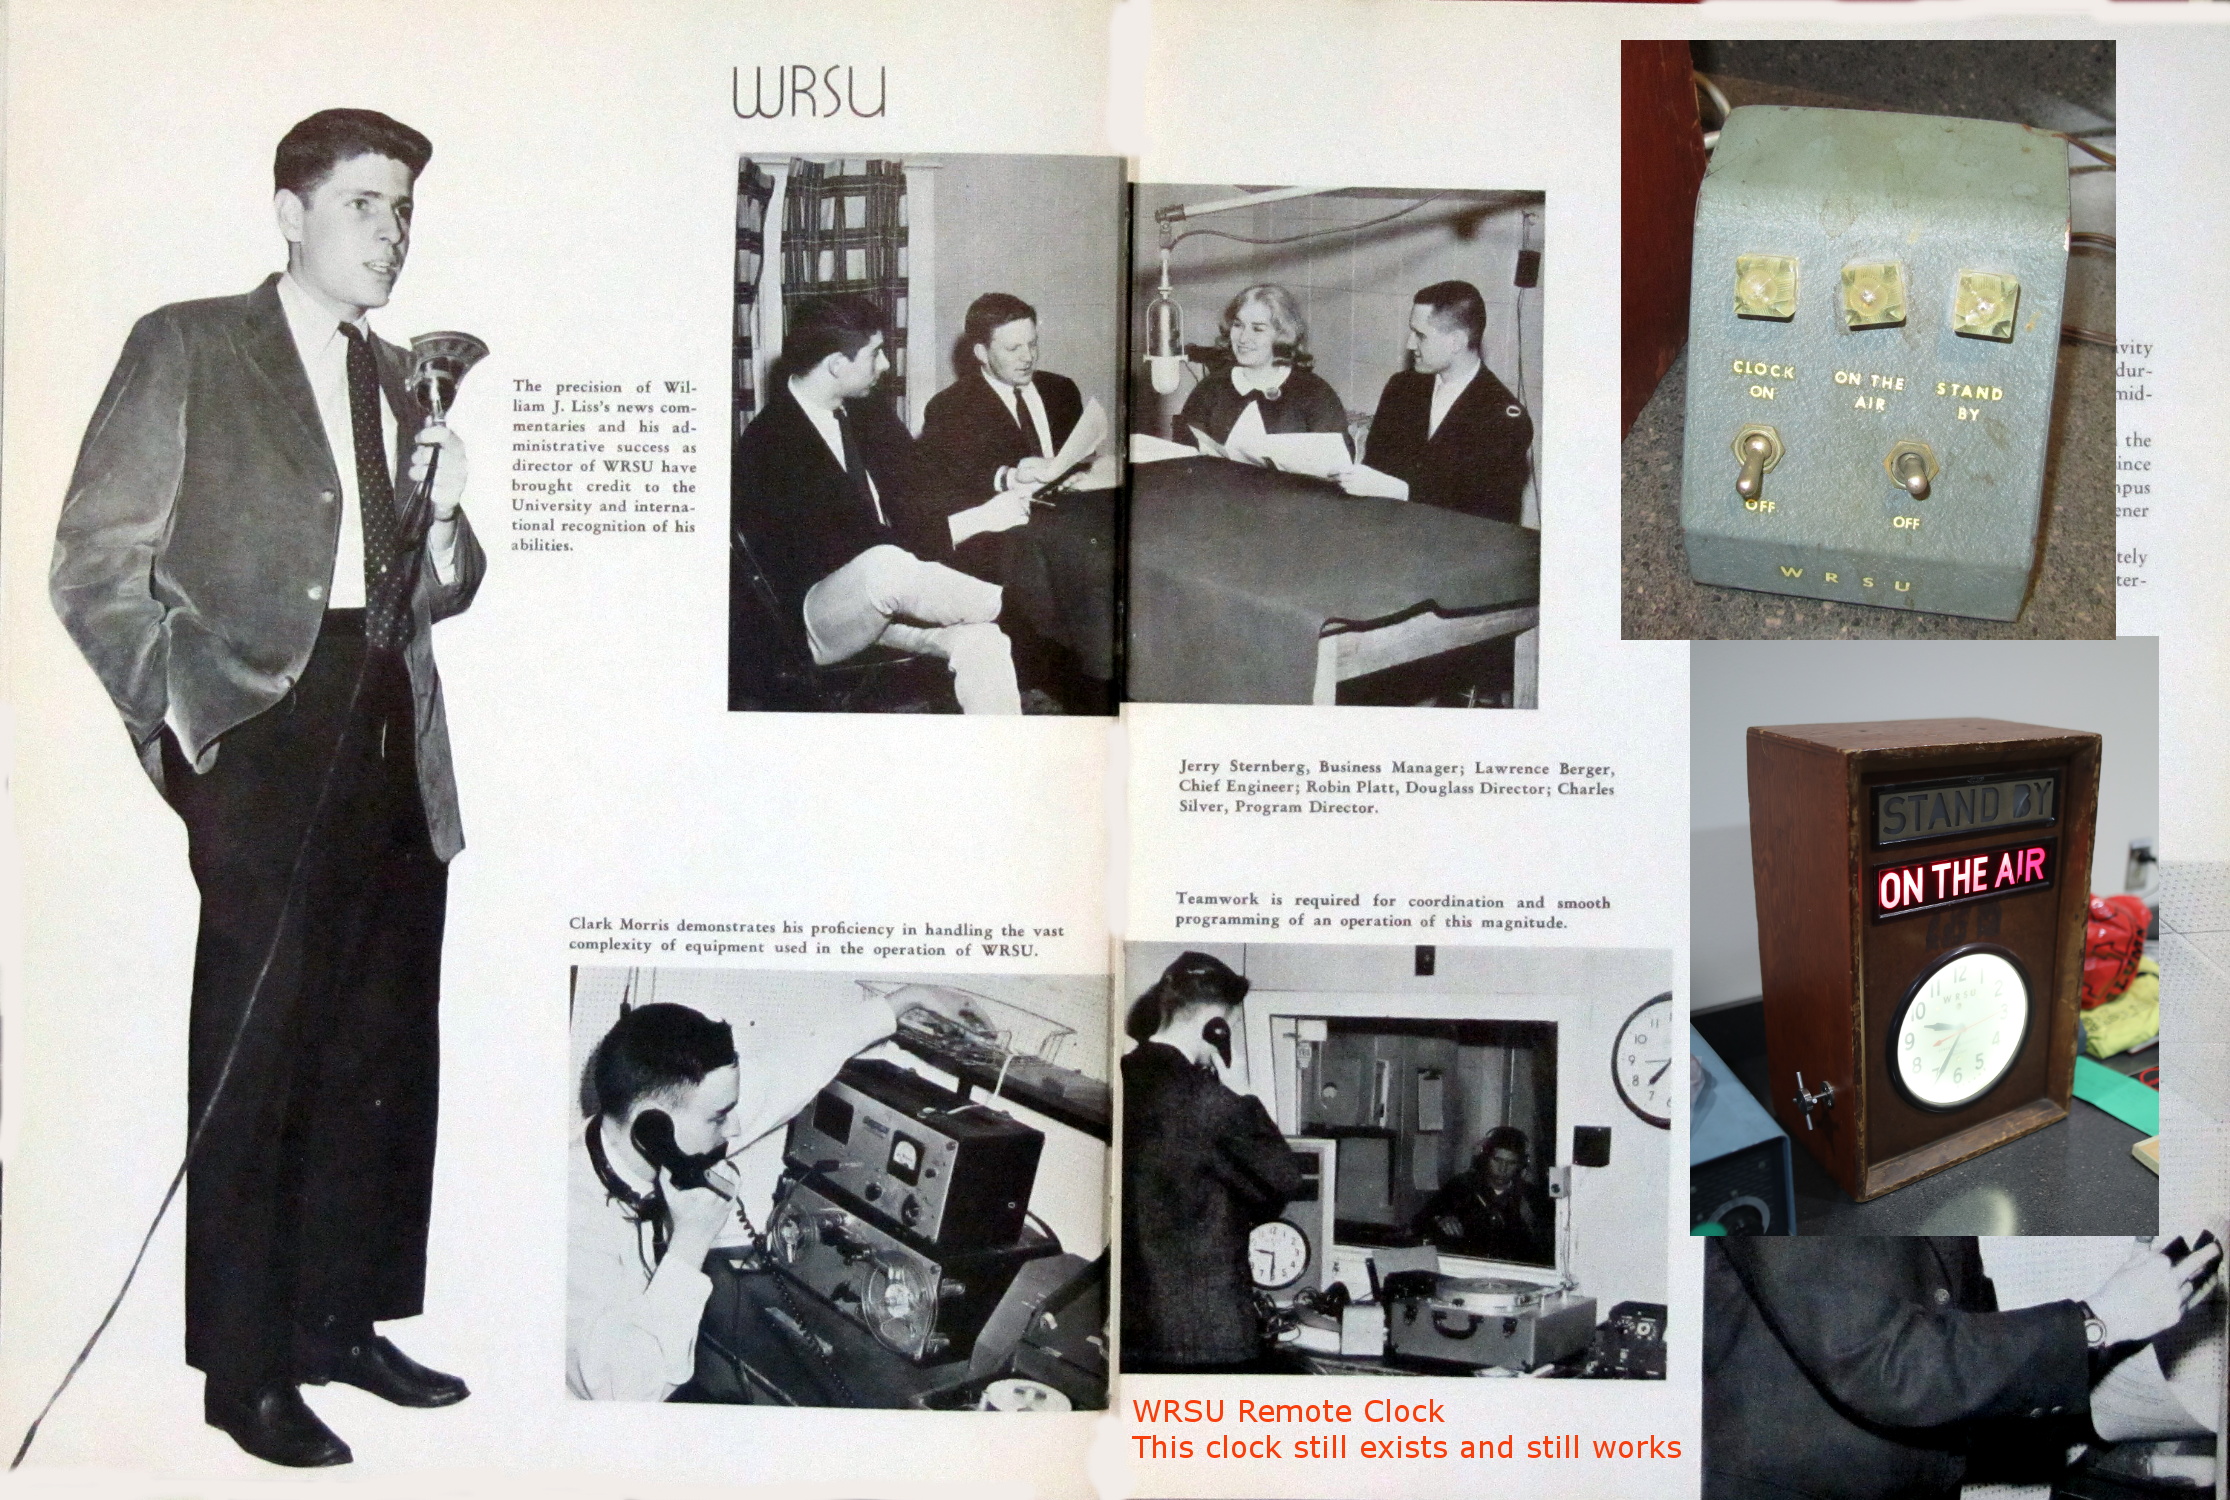 1961 - The WRSU Remote Clock makes an appearance. It is not known when the clock was actually built, so this might be one of the first appearances.